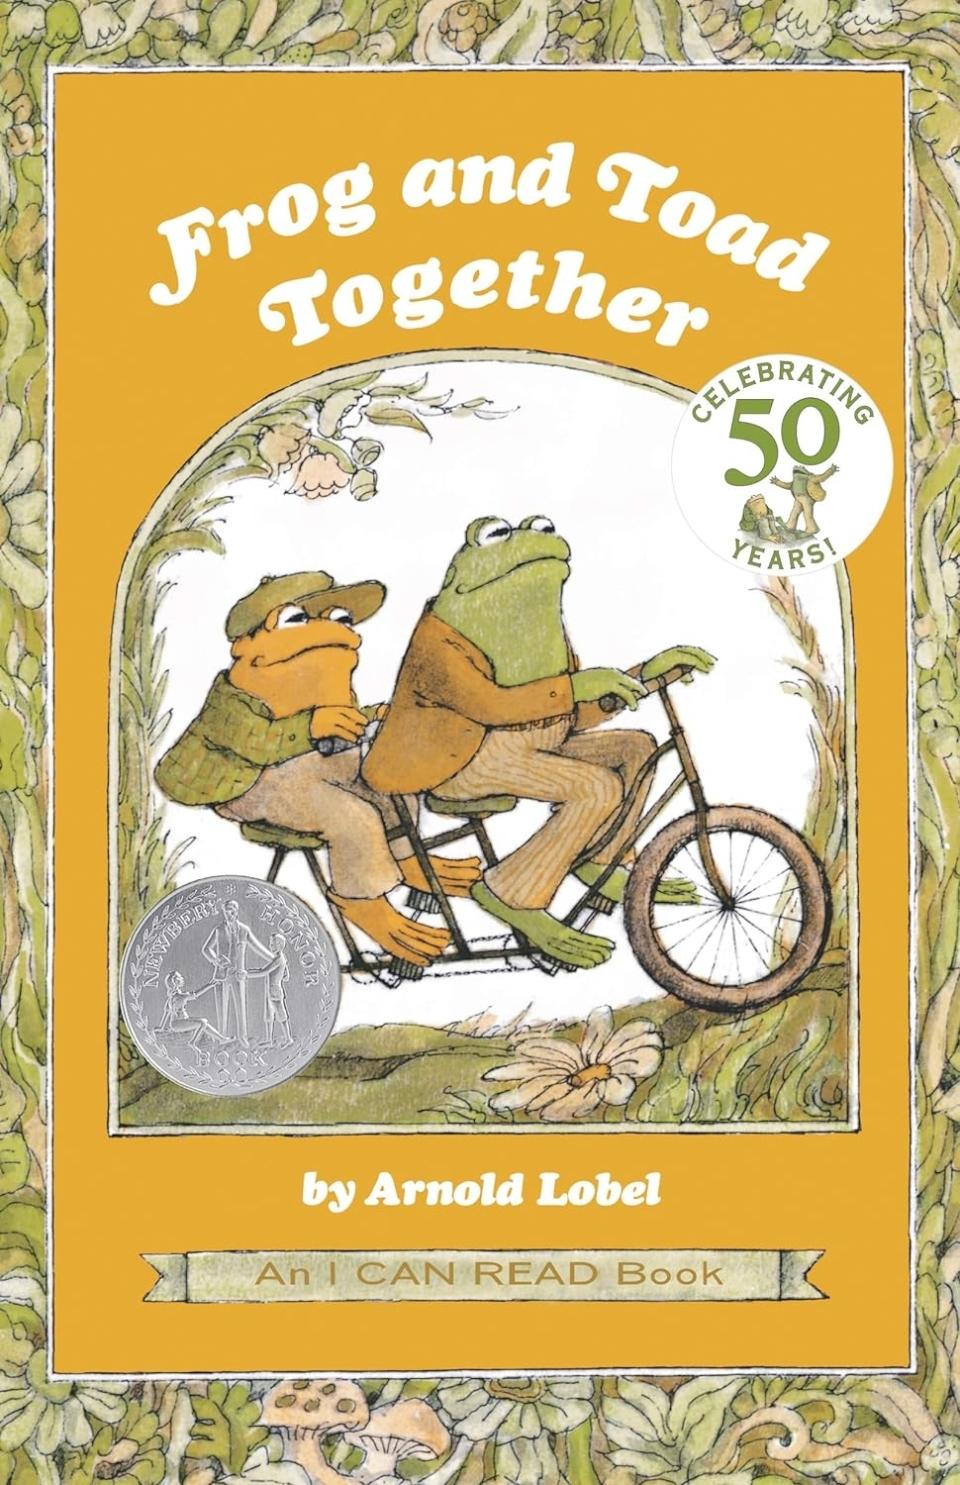 Cover of "Frog and Toad Together" book, showing the characters Frog and Toad on a bicycle, celebrating 50 years